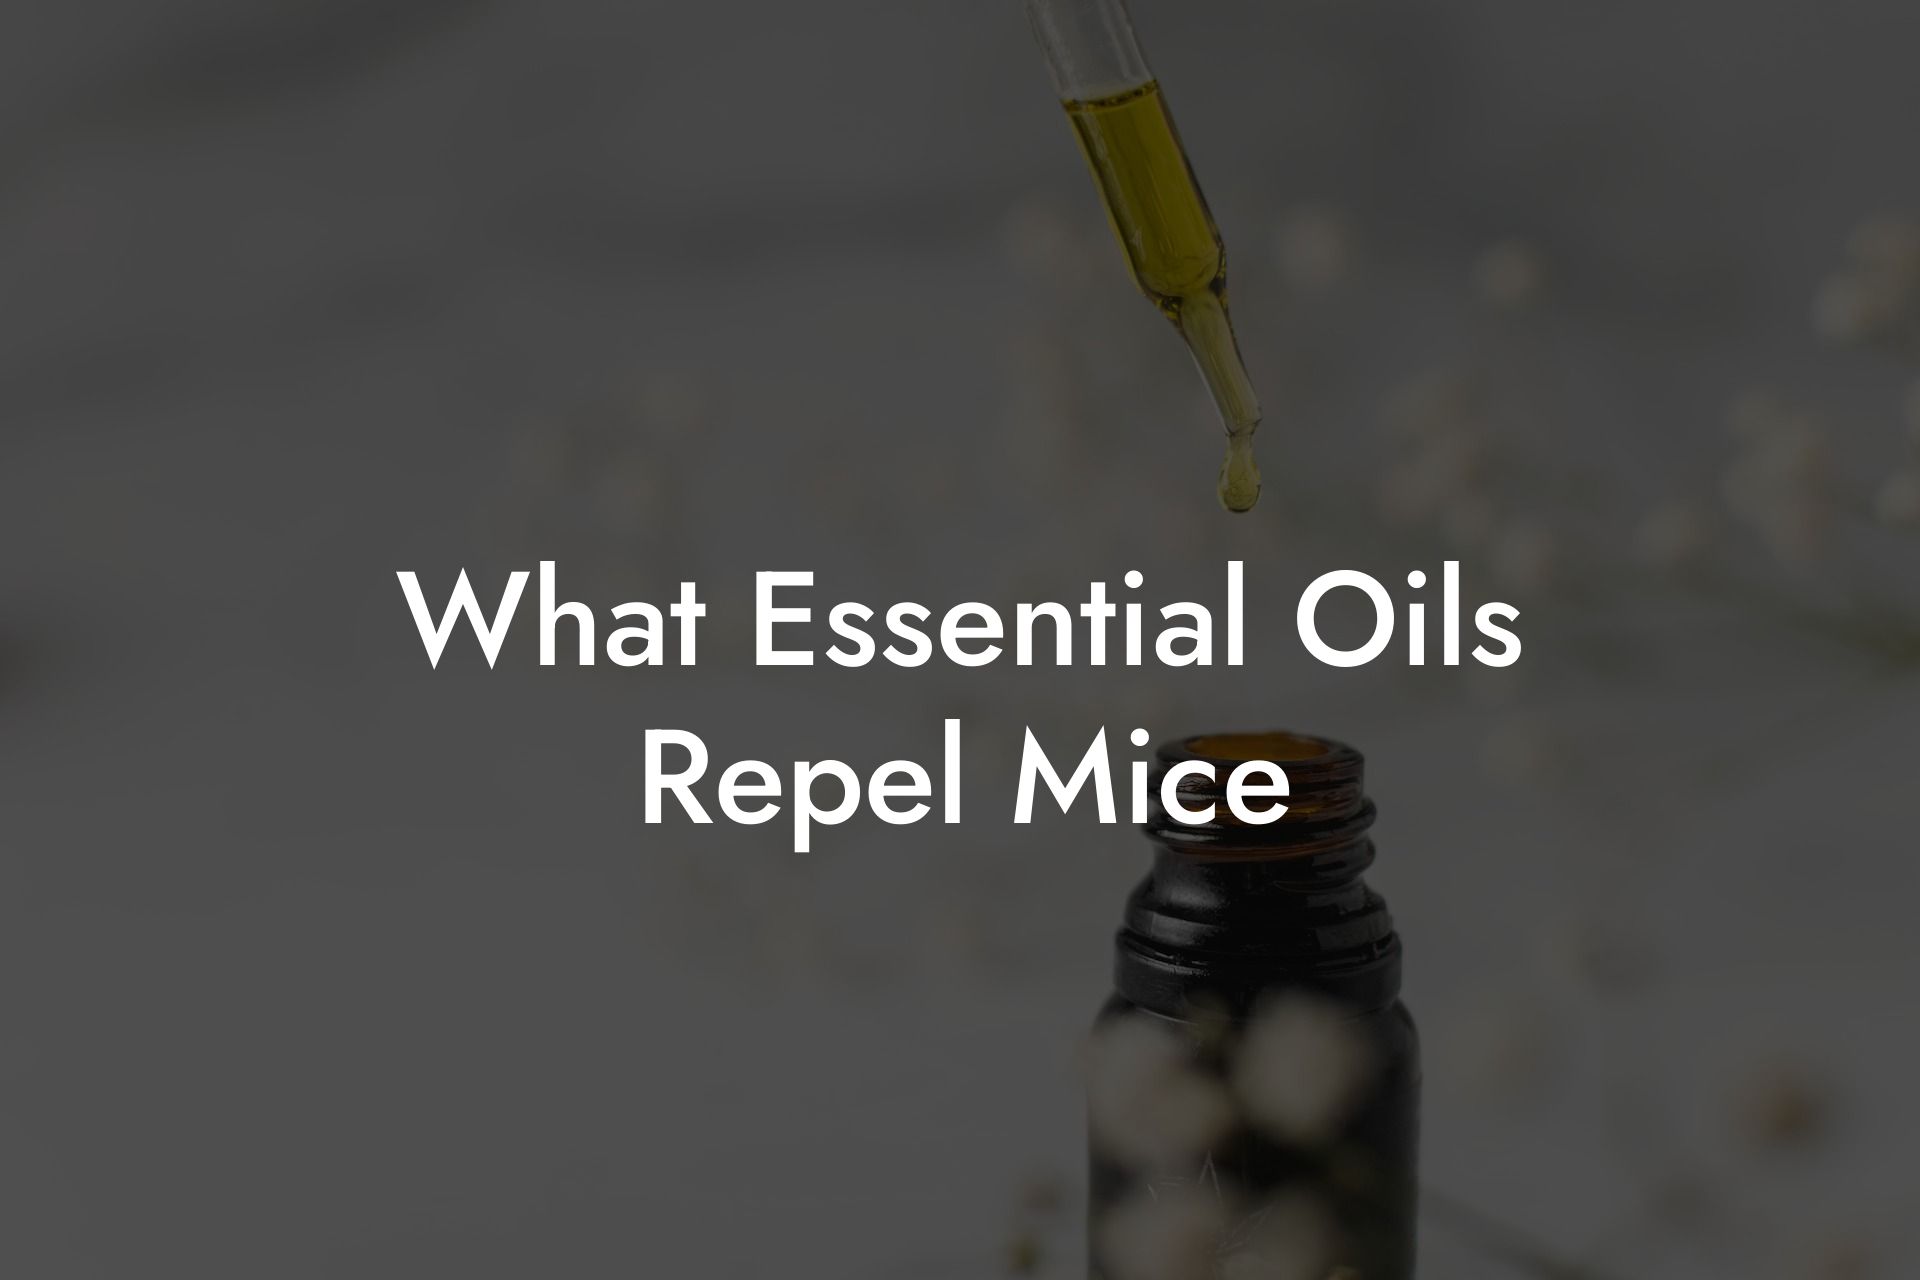 What Essential Oils Repel Mice